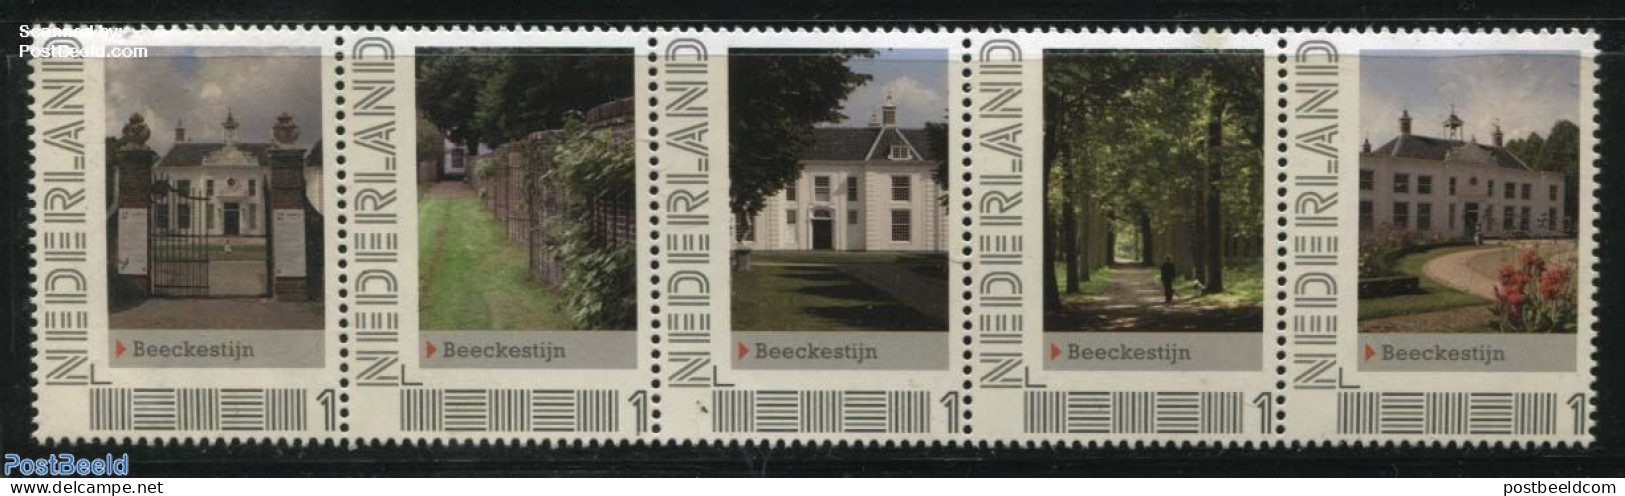 Netherlands - Personal Stamps TNT/PNL 2012 Beeckestijn 5V [::::], Mint NH, Nature - Trees & Forests - Castles & Fortif.. - Rotary Club